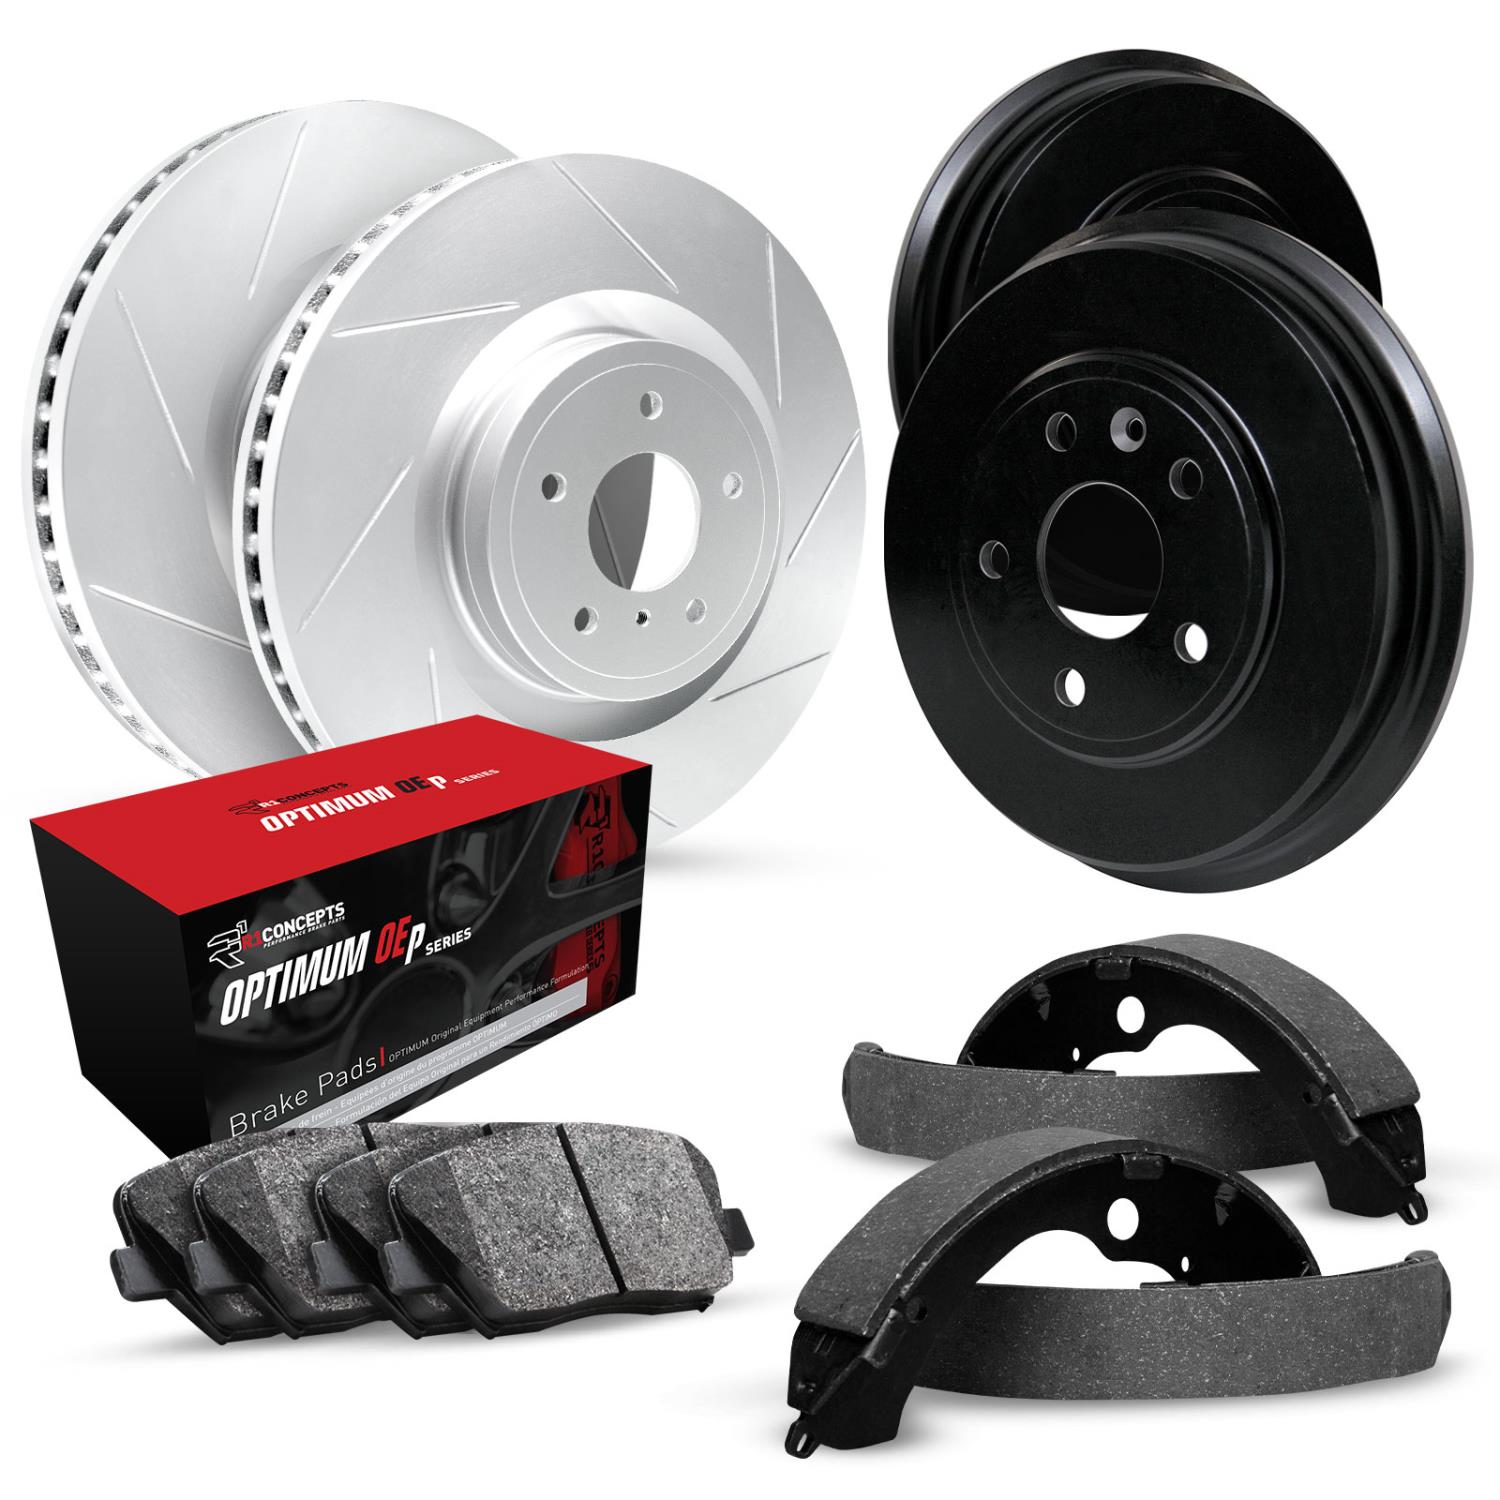 GEO-Carbon Slotted Brake Rotor & Drum Set w/Optimum OE Pads & Shoes, 1975-1978 GM, Position: Front & Rear